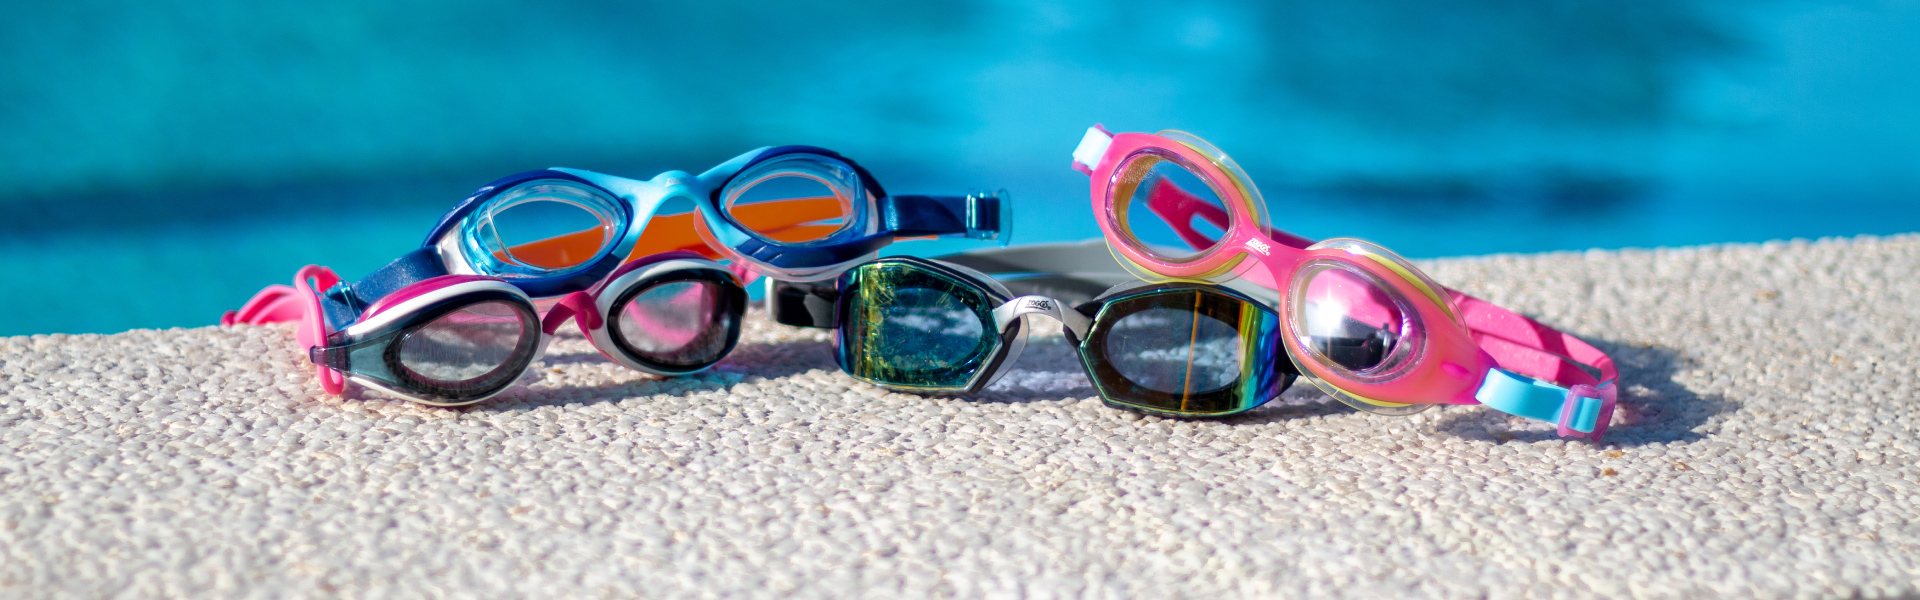 Product Spotlight: Zoggs Launch Predator Flex Swimming Goggles with clear lenses